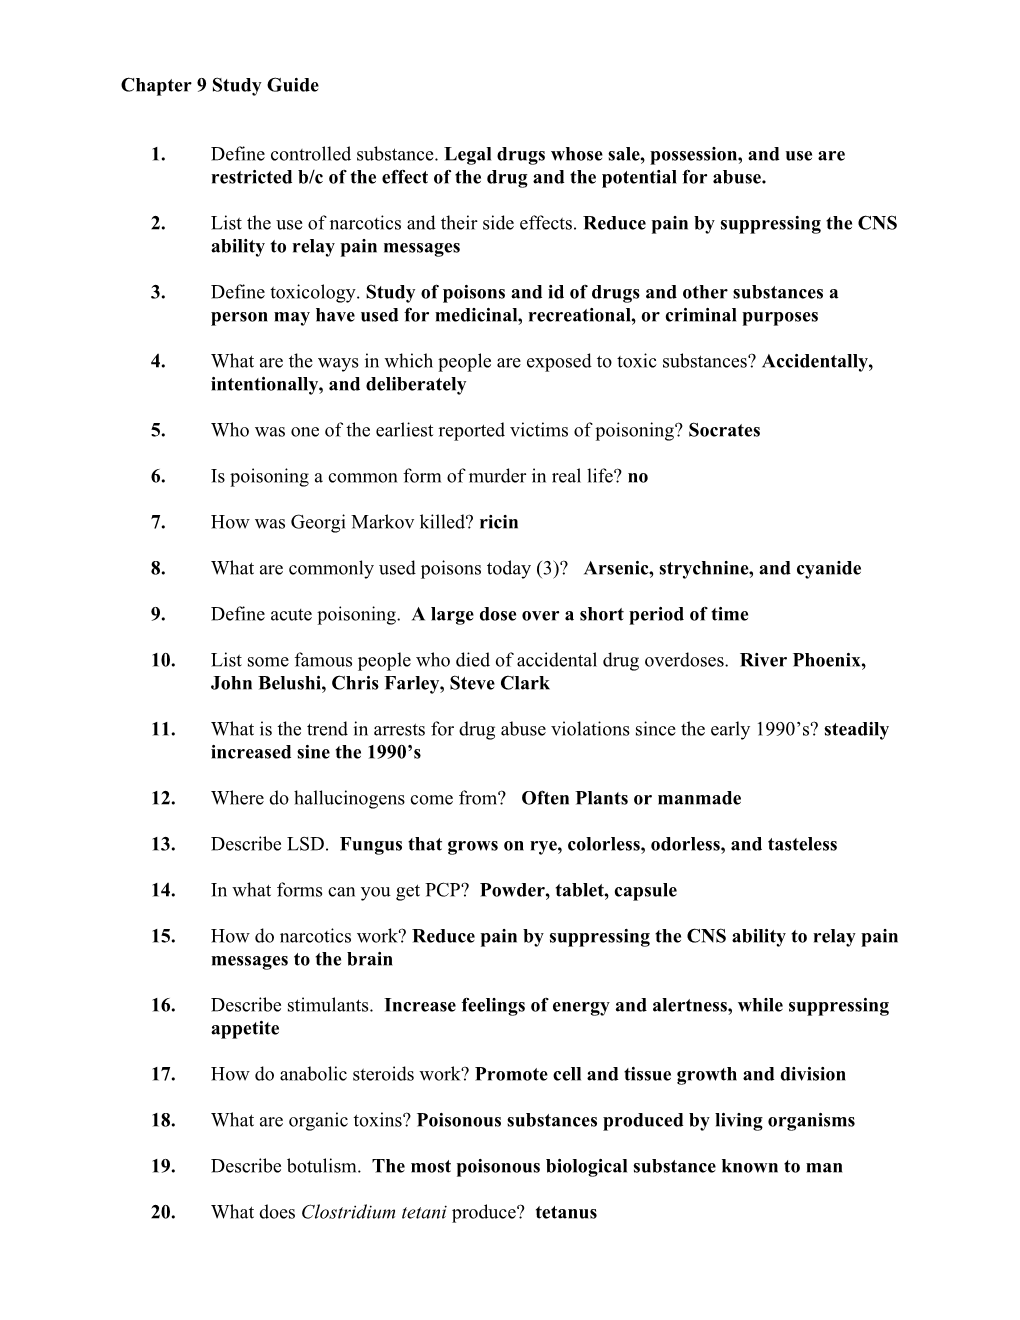 Chapter 9 Study Guide s1